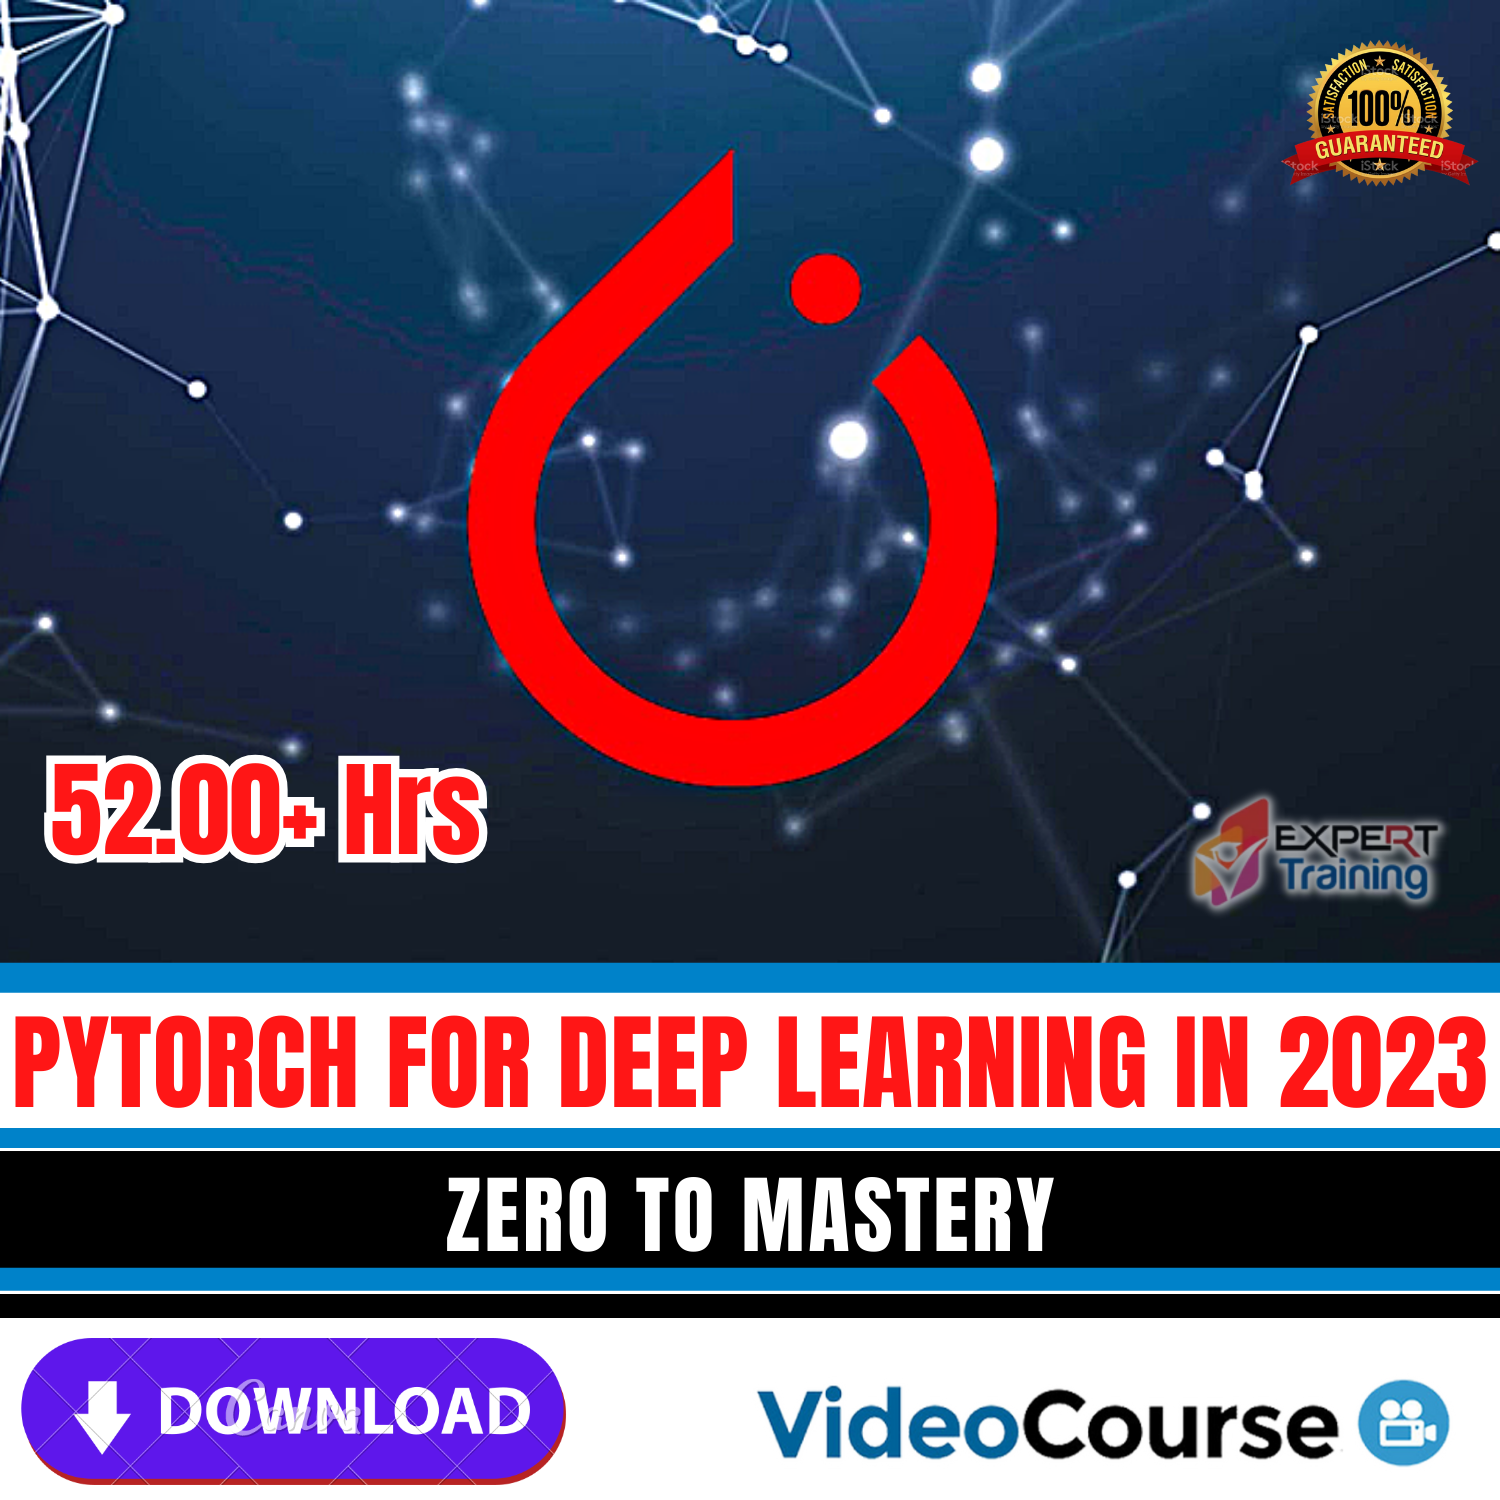 PyTorch for Deep Learning in 2023 Zero to Mastery